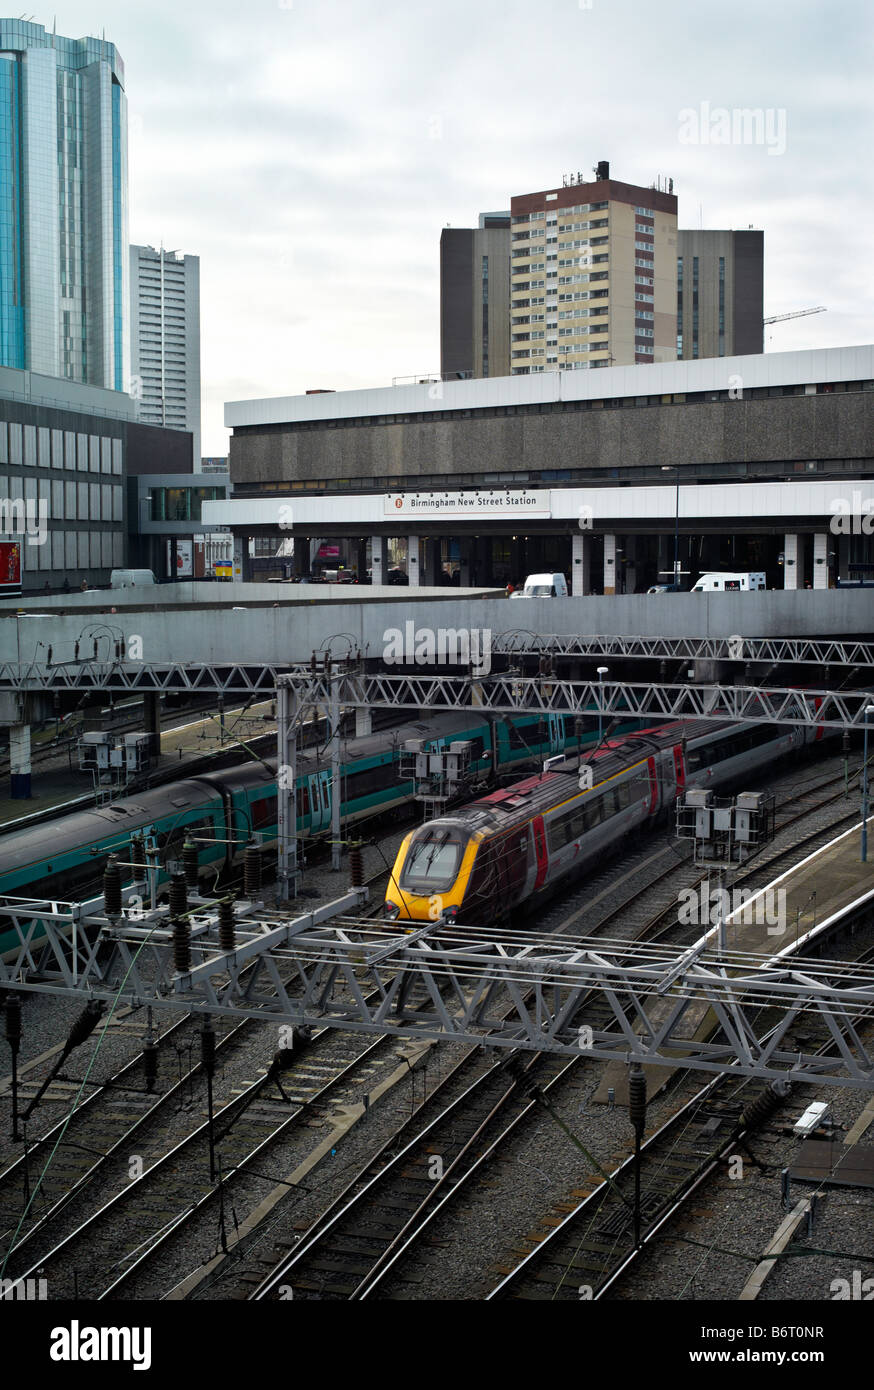 A train arriving at New Street railway station in Birmingham Stock Photo